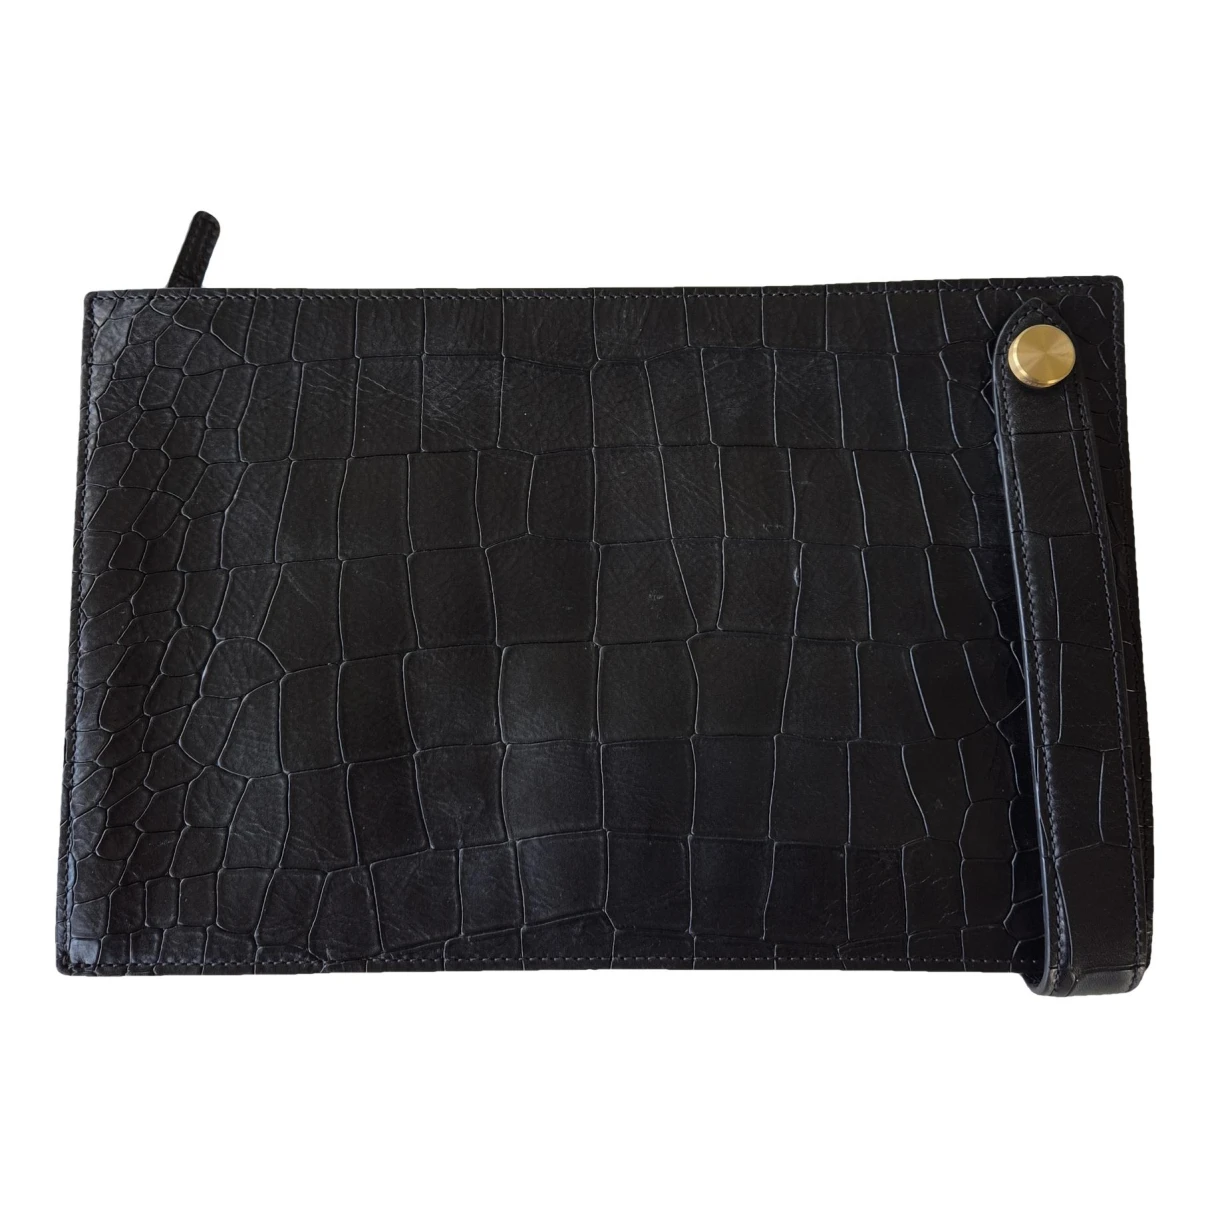 Pre-owned Mulberry Kite Leather Clutch Bag In Black